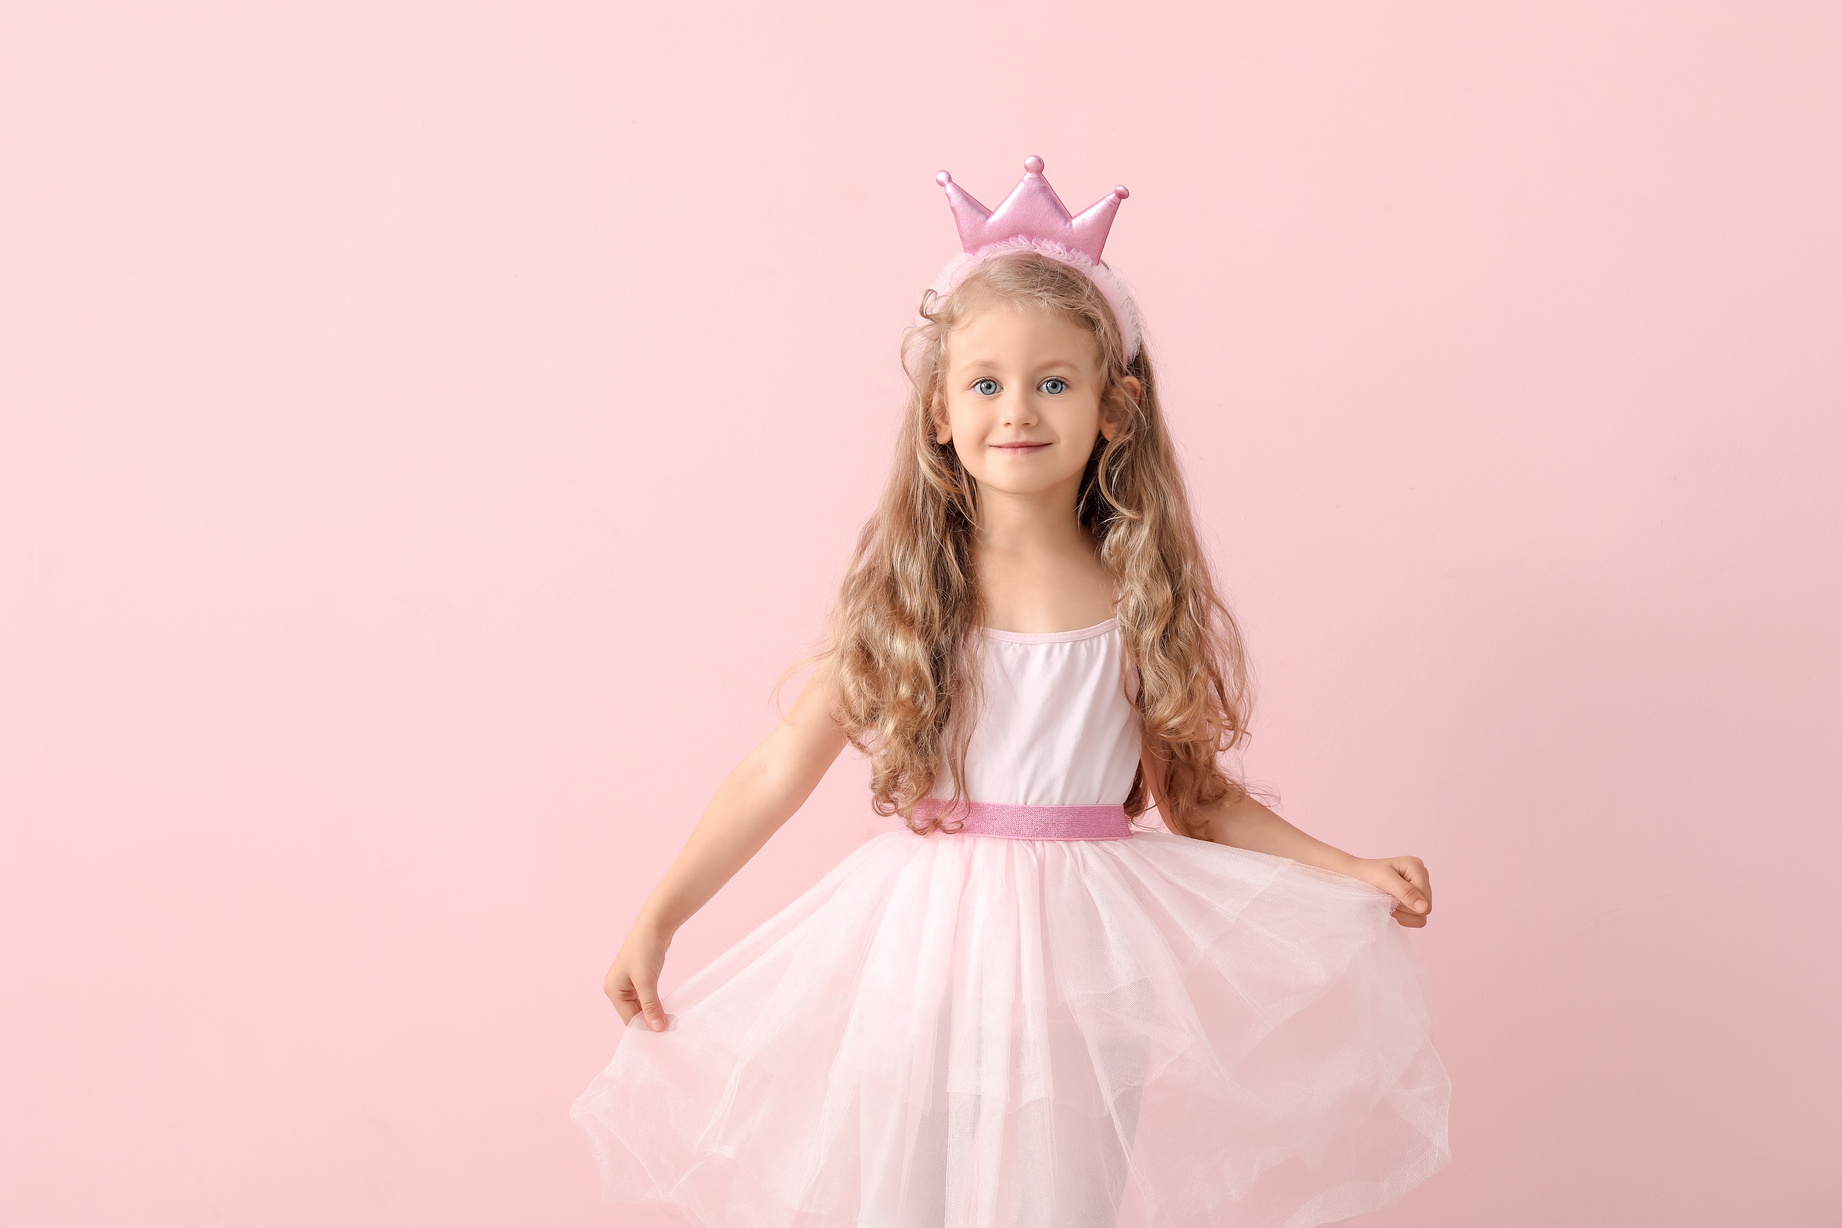 Girl in Princess Costume on Pink Background